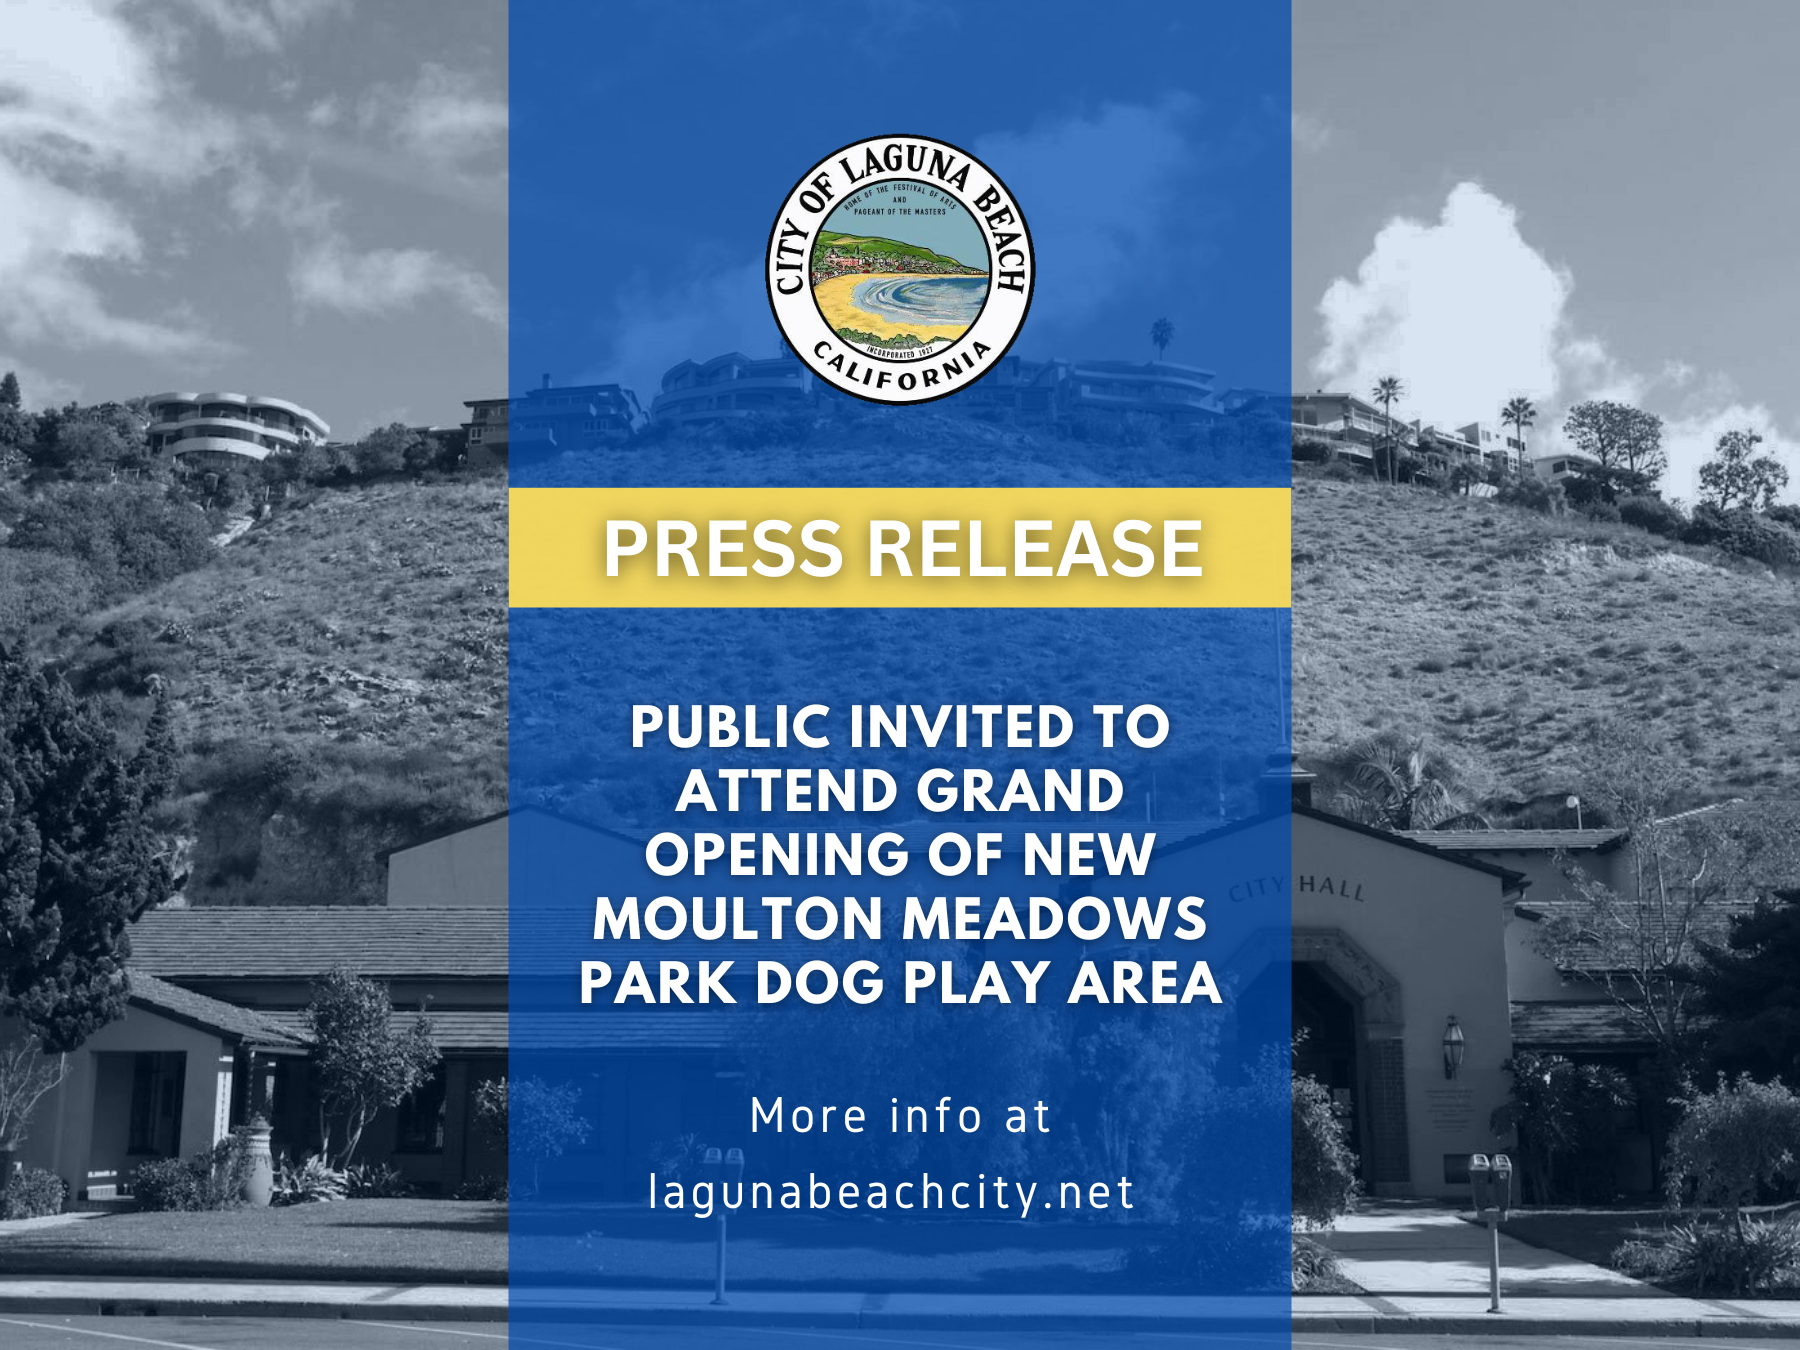 Press Release - Public Invited to Attend Grand Opening of New Moulton Meadows Park Dog Play Area - Website